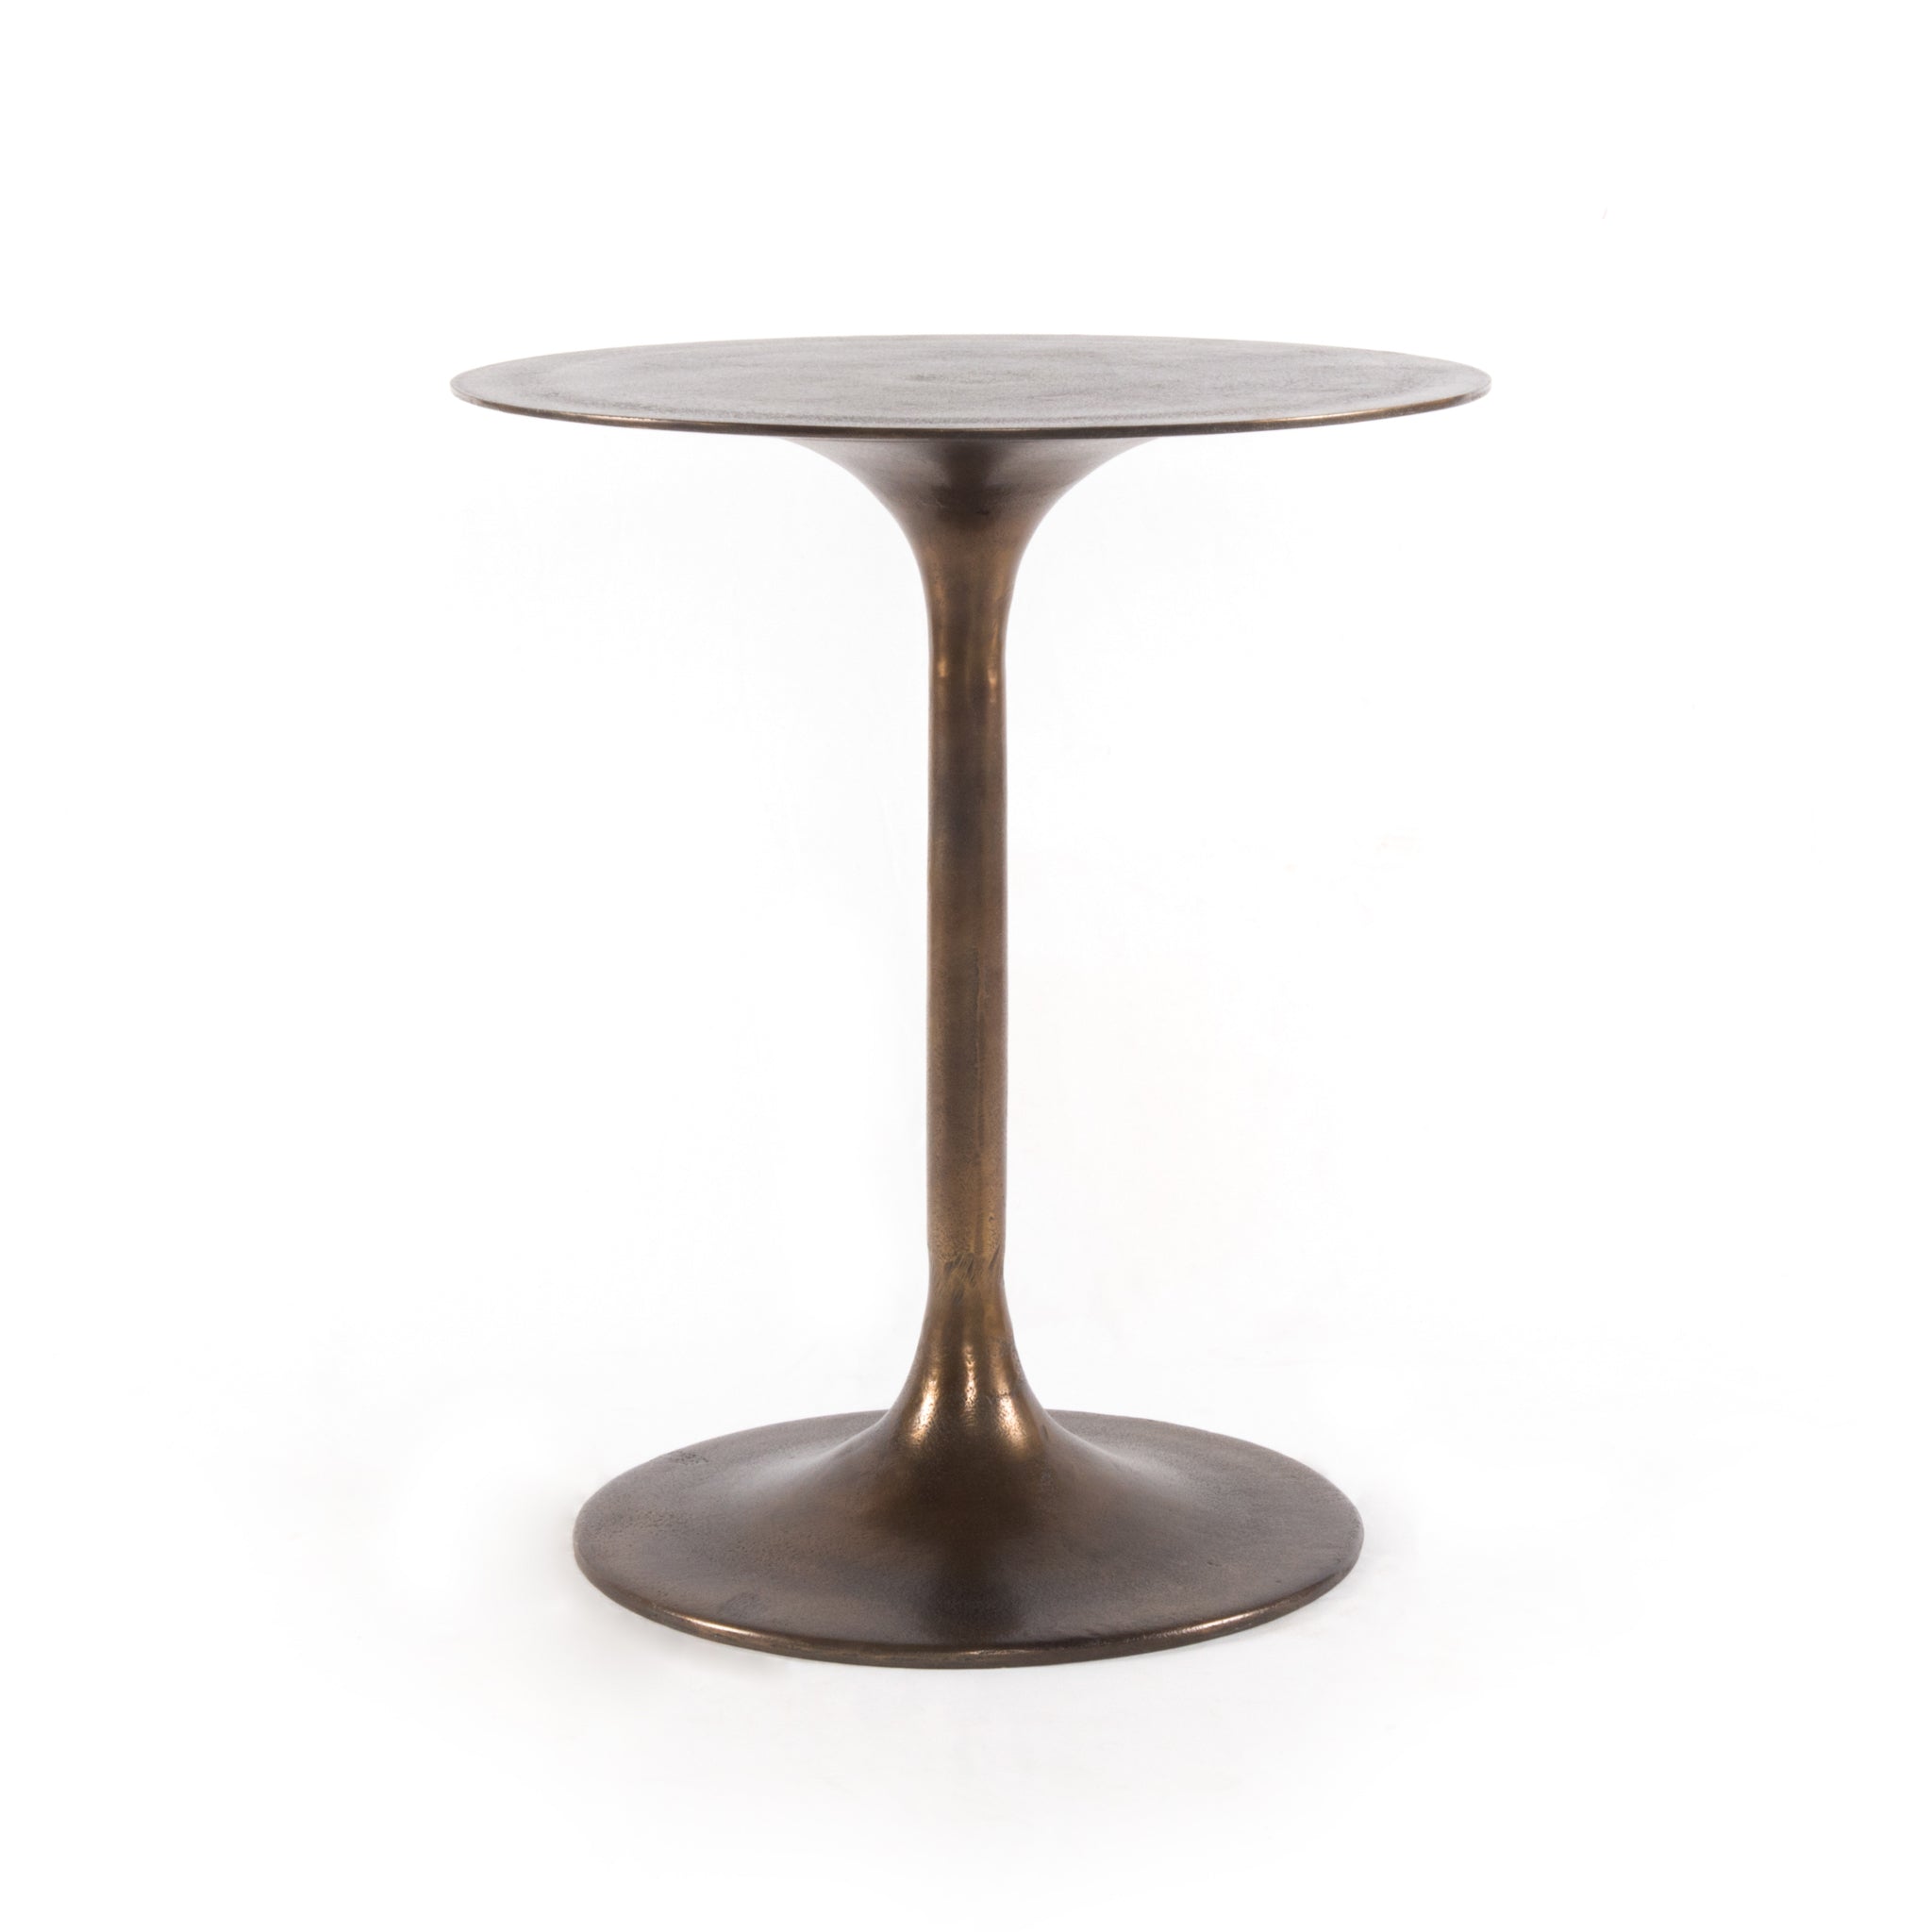 Classic tulip shaping in textural cast-aluminum makes for a modern side table. Finished in antique rust to bring out alluring highs and lows. Great indoors or out — cover or store indoors during inclement weather and when not in use.  Overall Size: 20.00"w x 20.00"d x 23.50"h